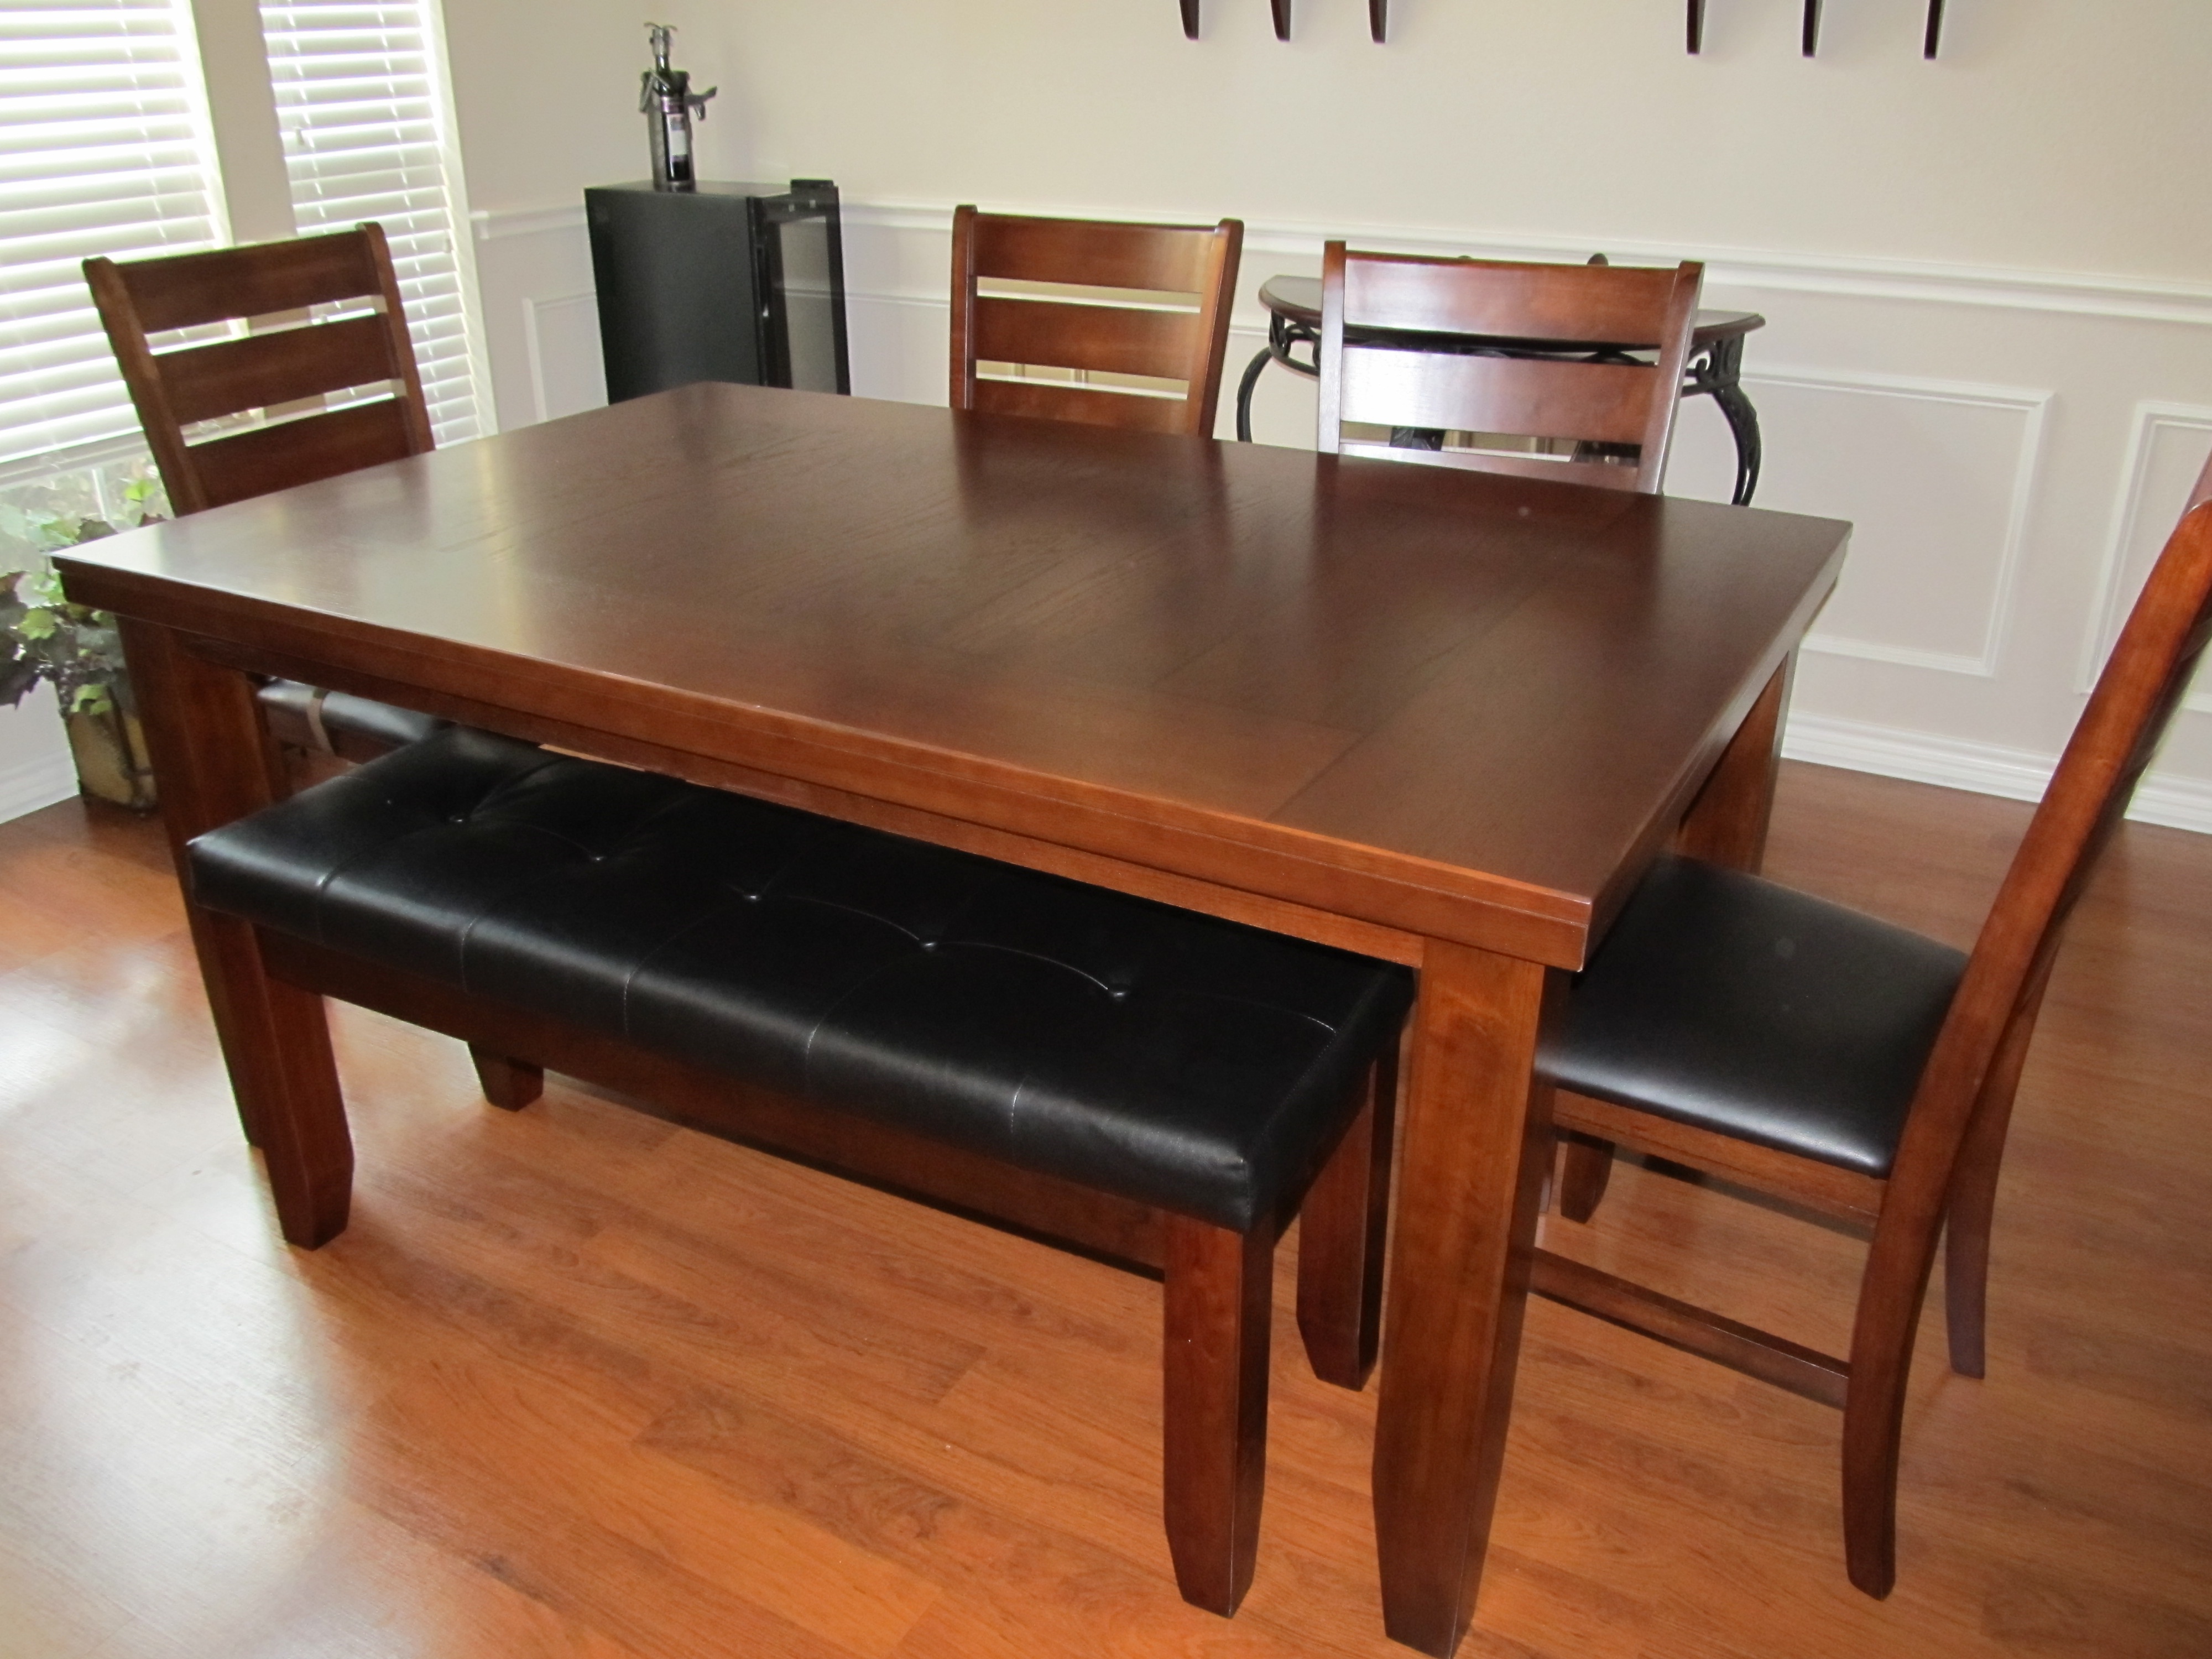 Glass Dining Room Table With Bench Seats